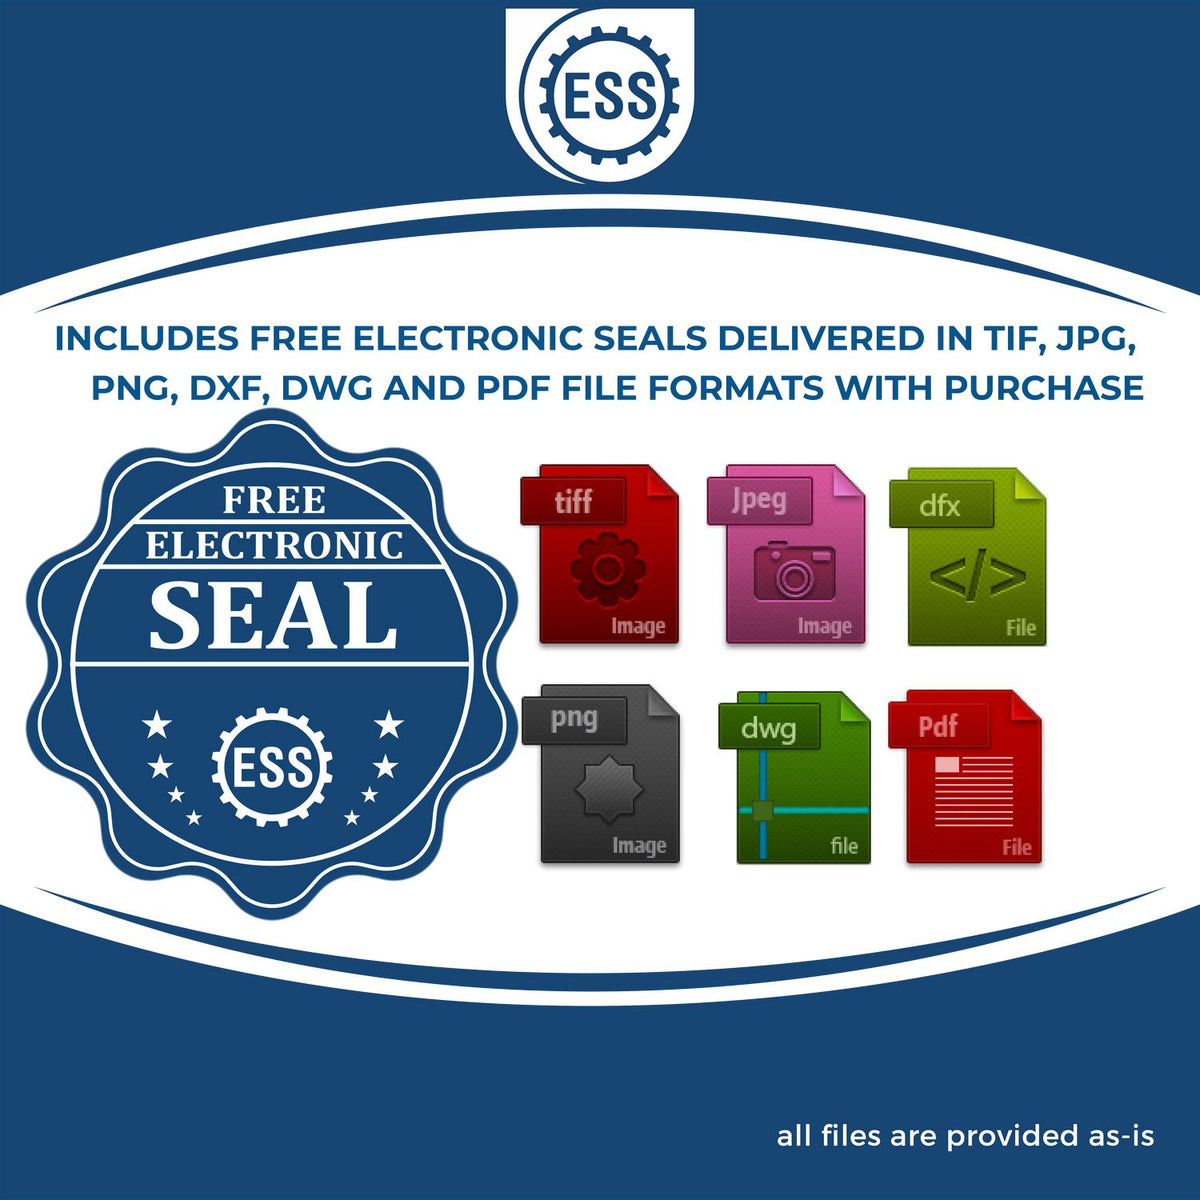 An infographic for the free electronic seal for the Hybrid Maine Land Surveyor Seal illustrating the different file type icons such as DXF, DWG, TIF, JPG and PNG.